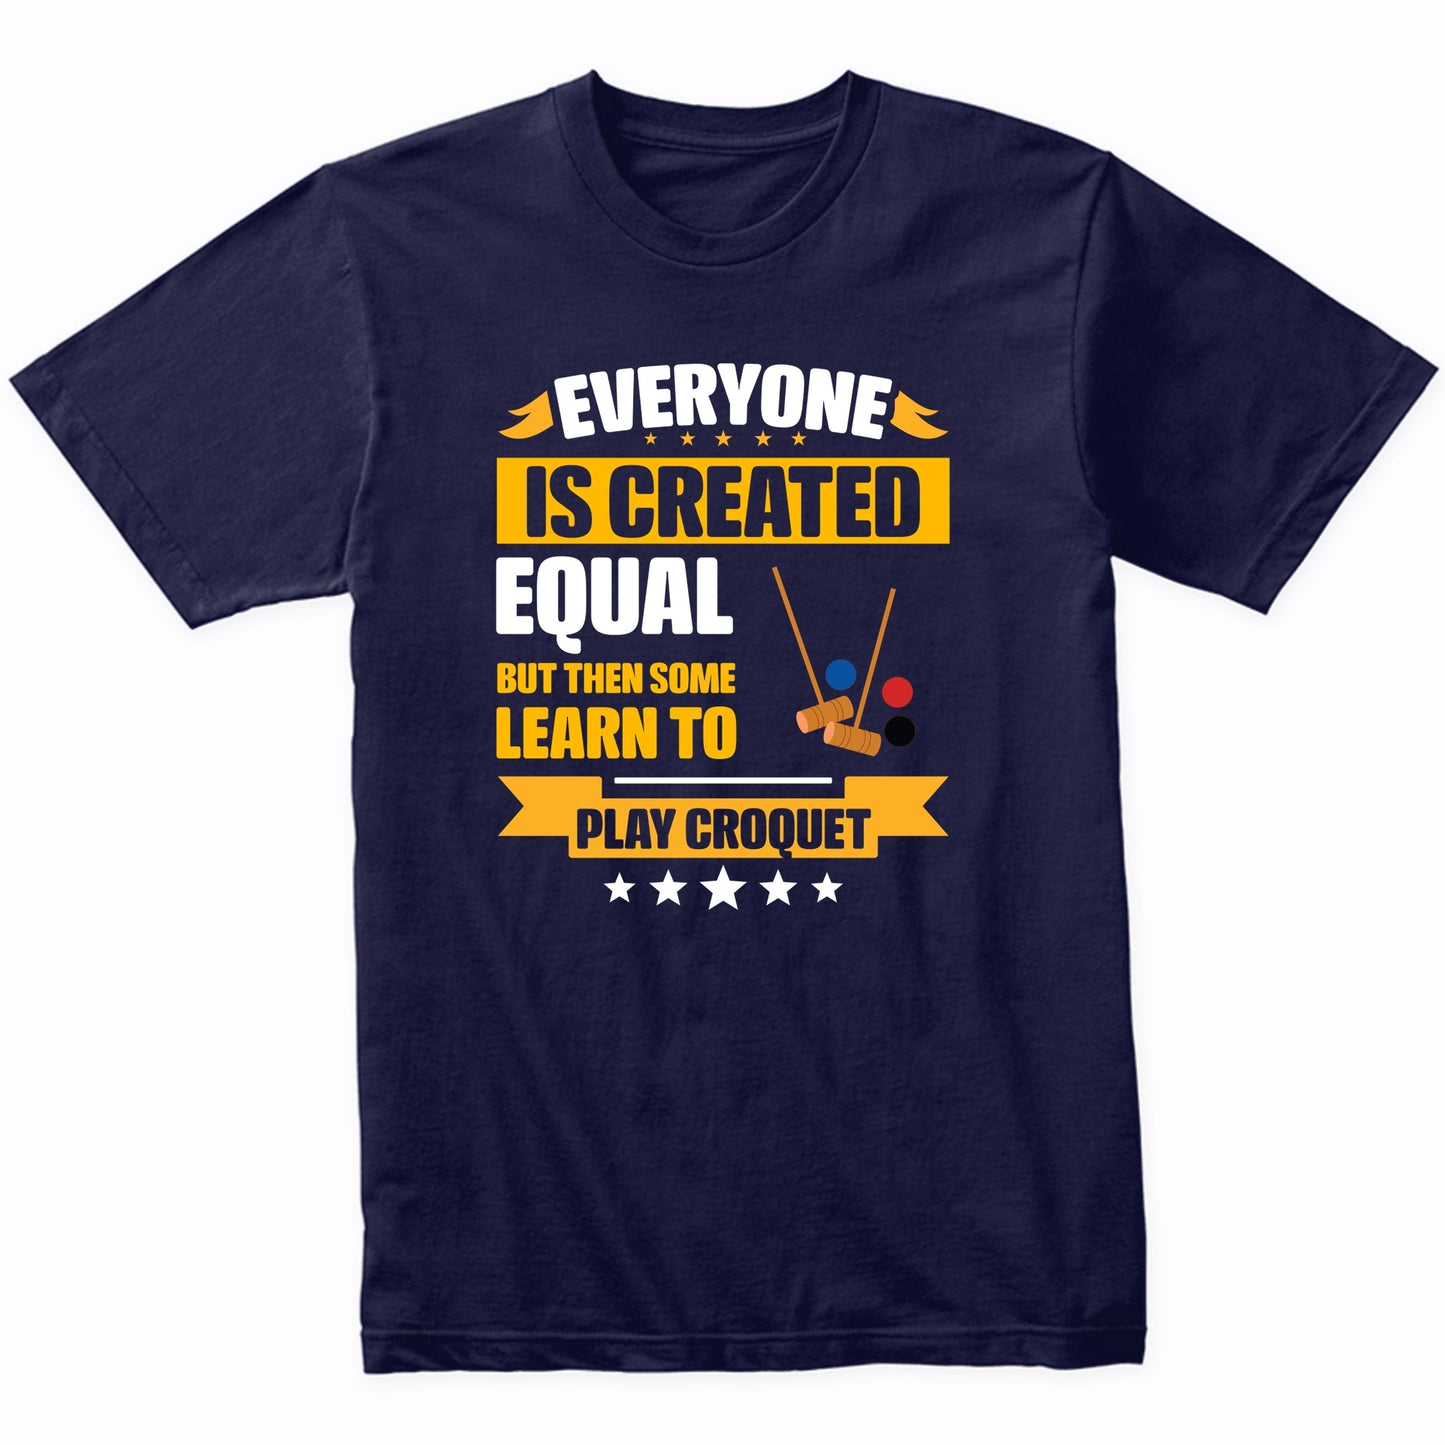 Everyone Is Created Equal But Then Some Learn To Play Croquet Funny T-Shirt